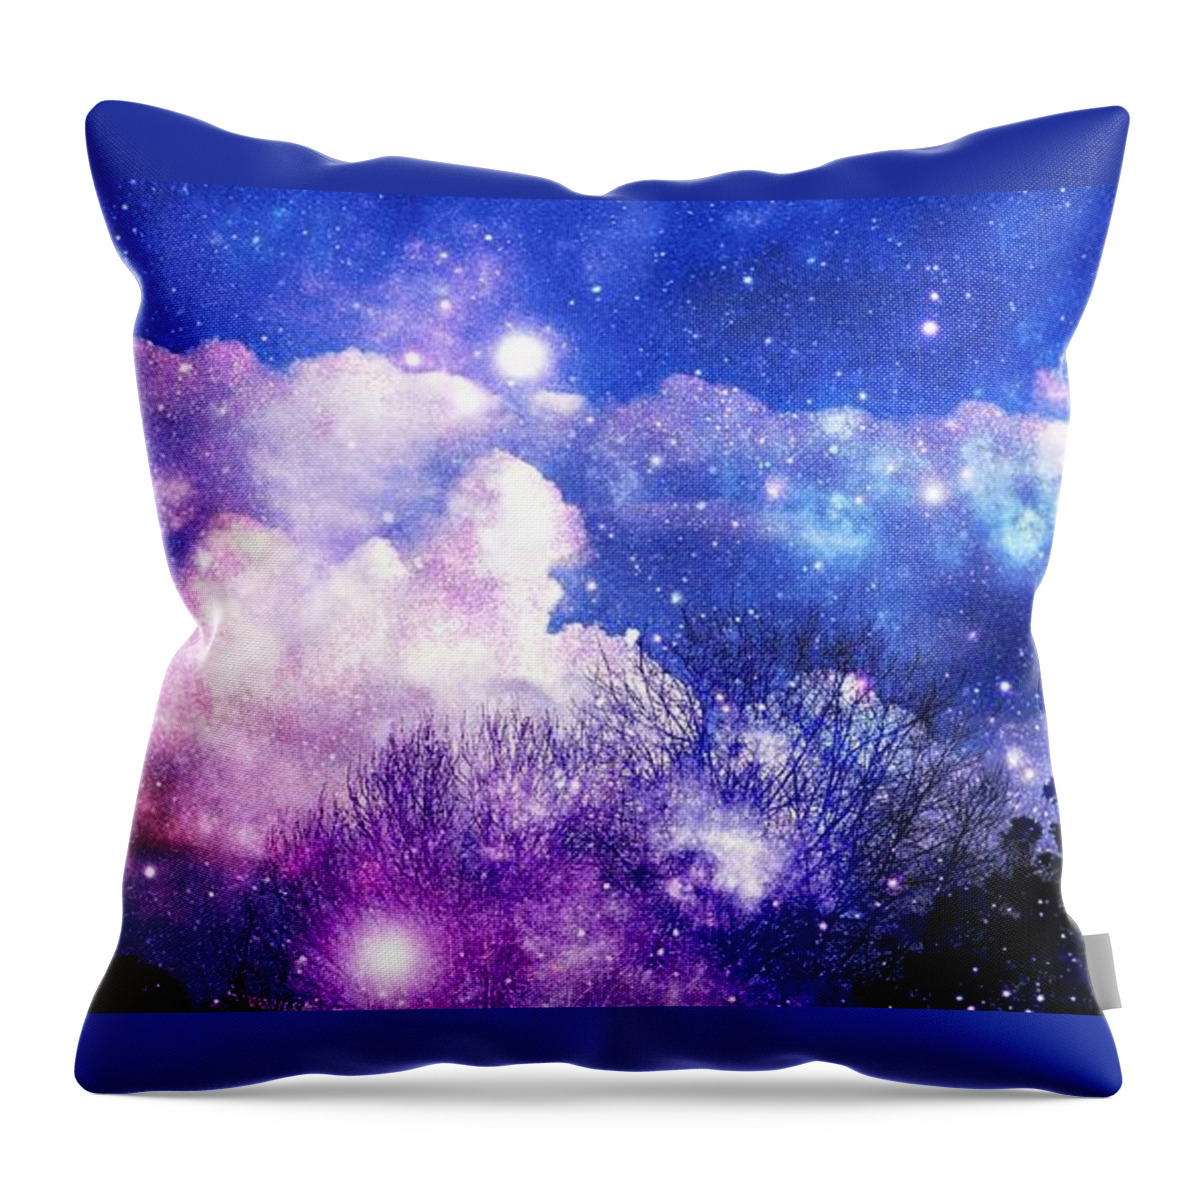 Clouds Throw Pillow featuring the mixed media As It Is In Heaven by Leanne Seymour